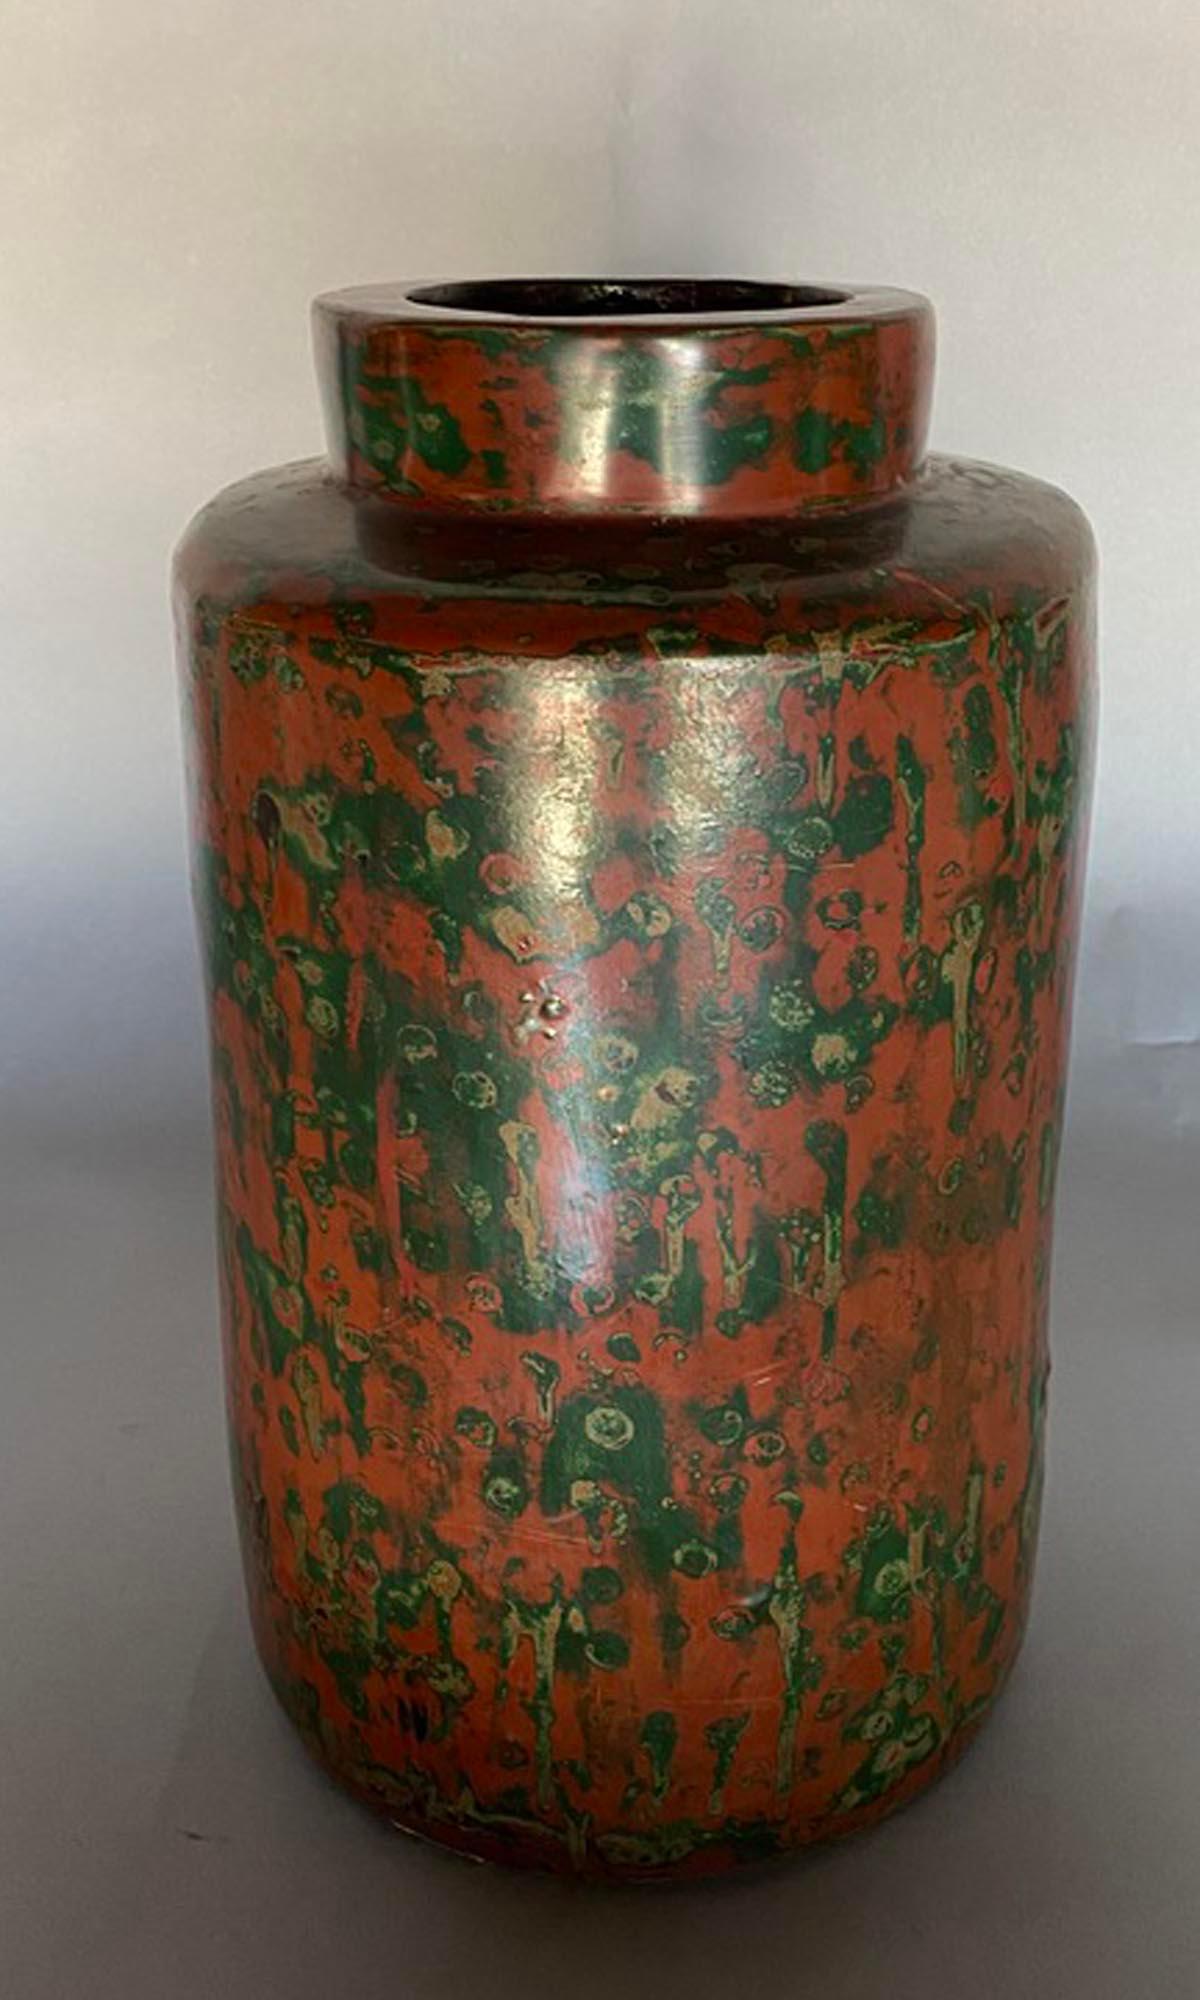 Very unusual lacquered bronze vase from Japan. 
 Interior of the vessel is solid bronze. Exterior is a multicolored lacquer on a dark red field. This striking Taisho to early Showa period vessel is in very good condition.